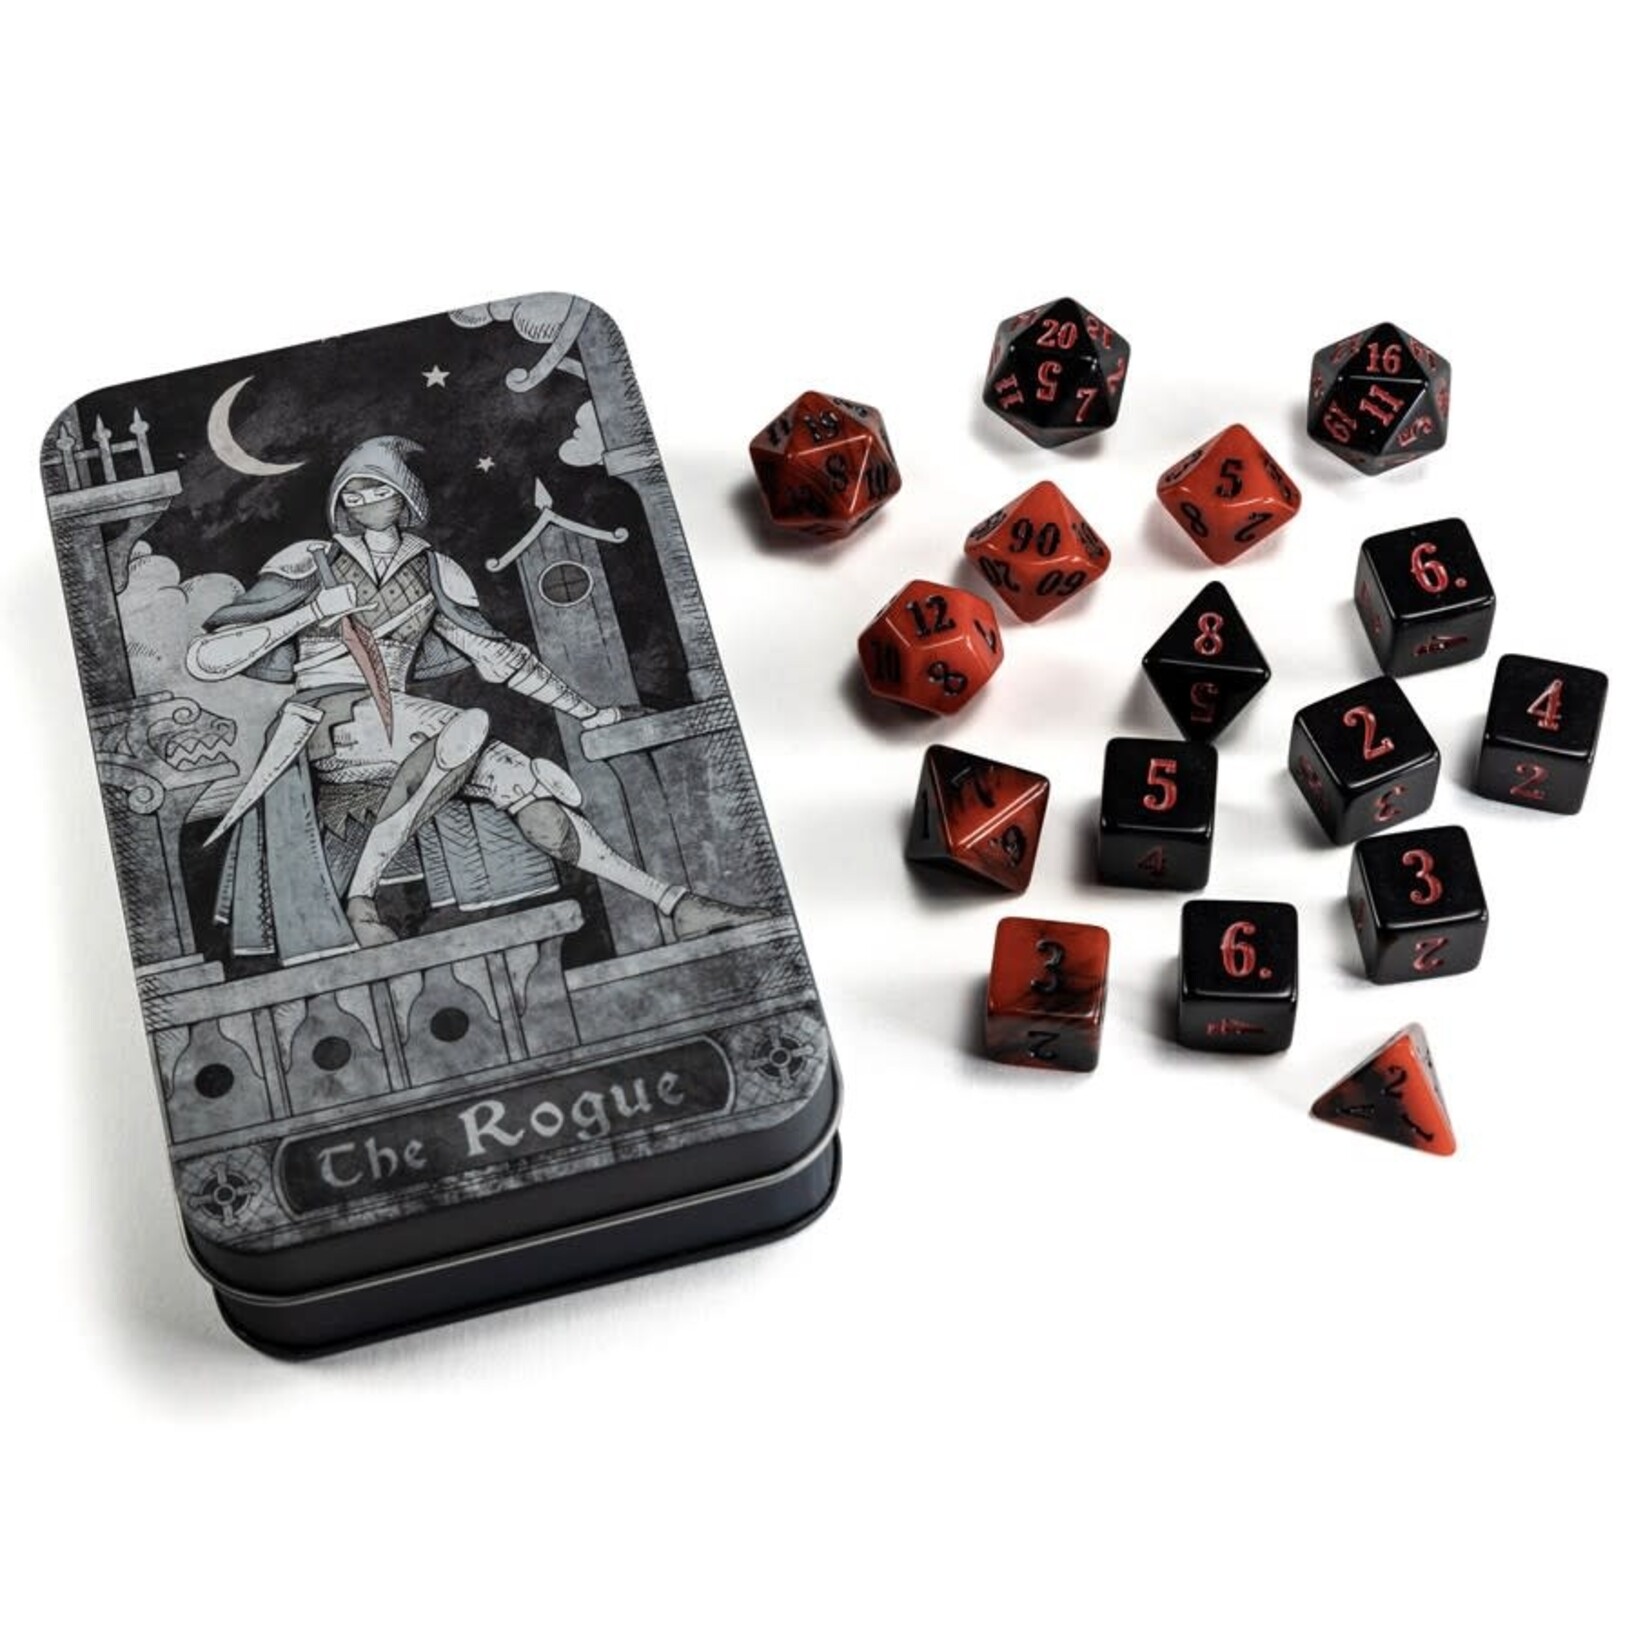 Beadle & Grimm RPG Class Dice Set: The Rogue